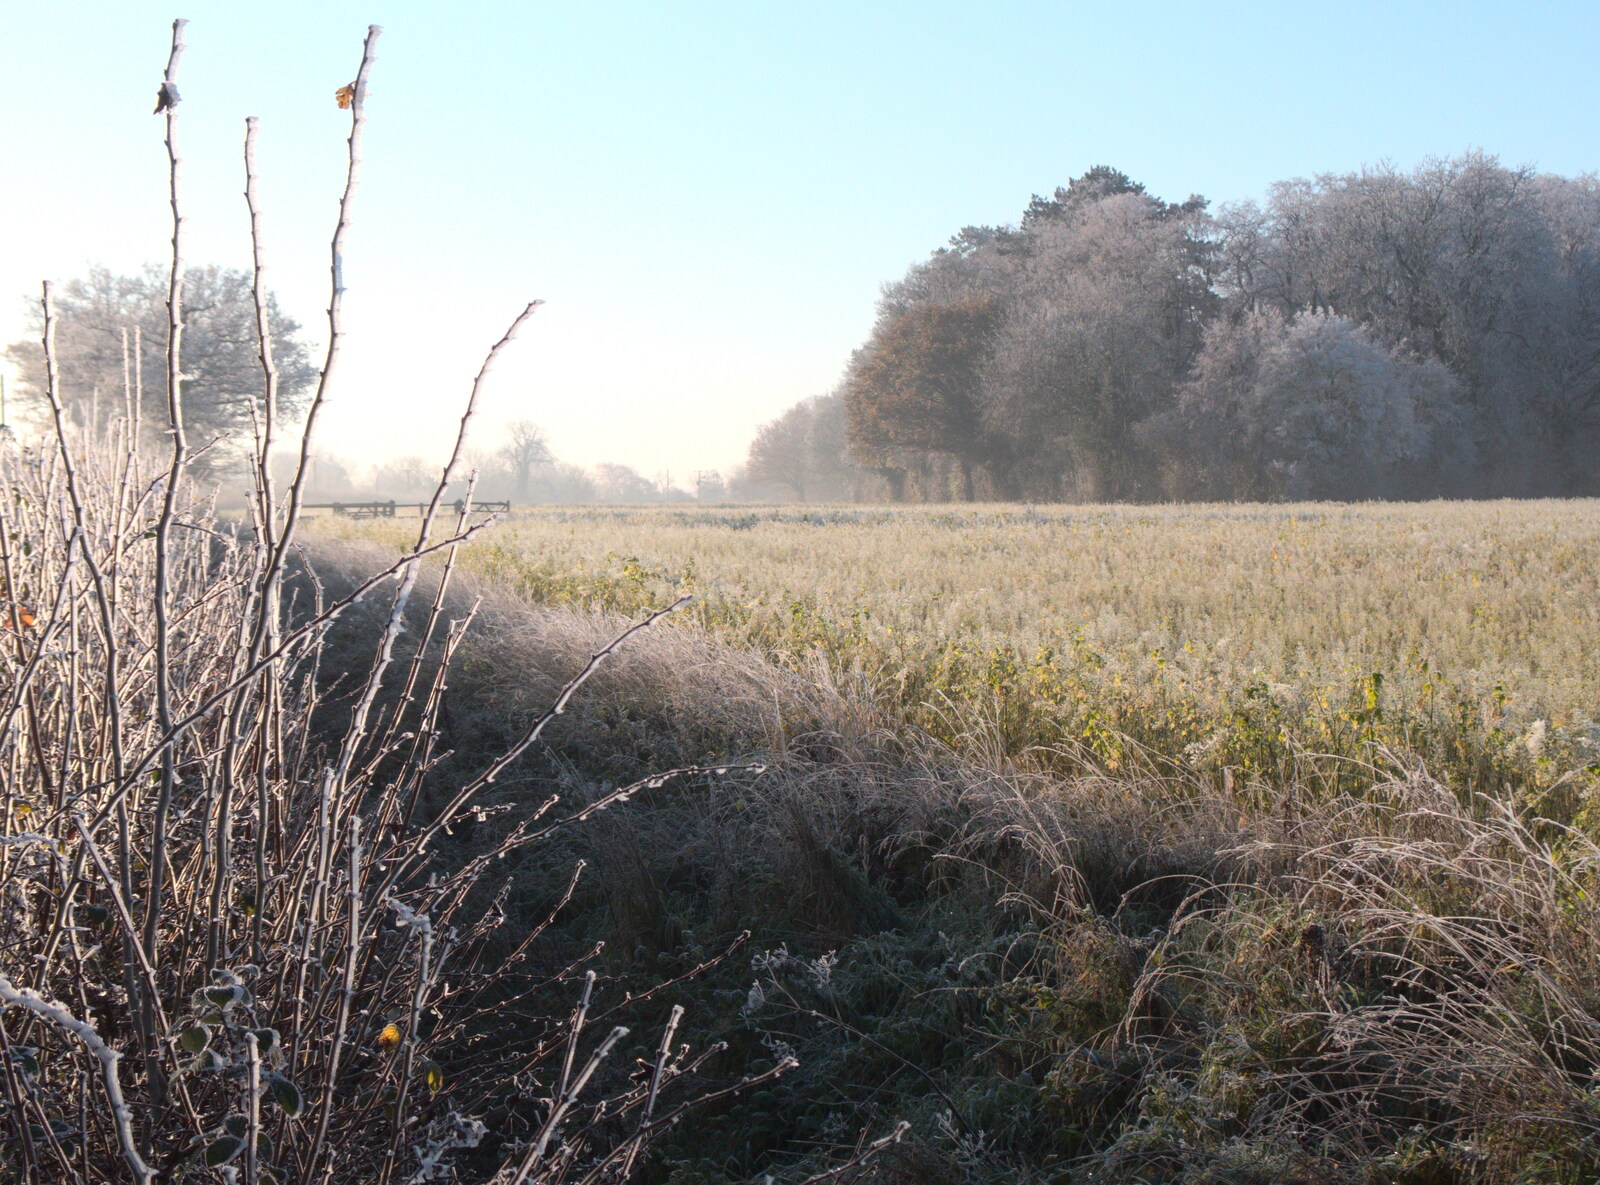 A frozen hedge near Ostler's Barn from More Frosty Rides and the Old Mink Sheds, Brome, Suffolk - 10th December 2020